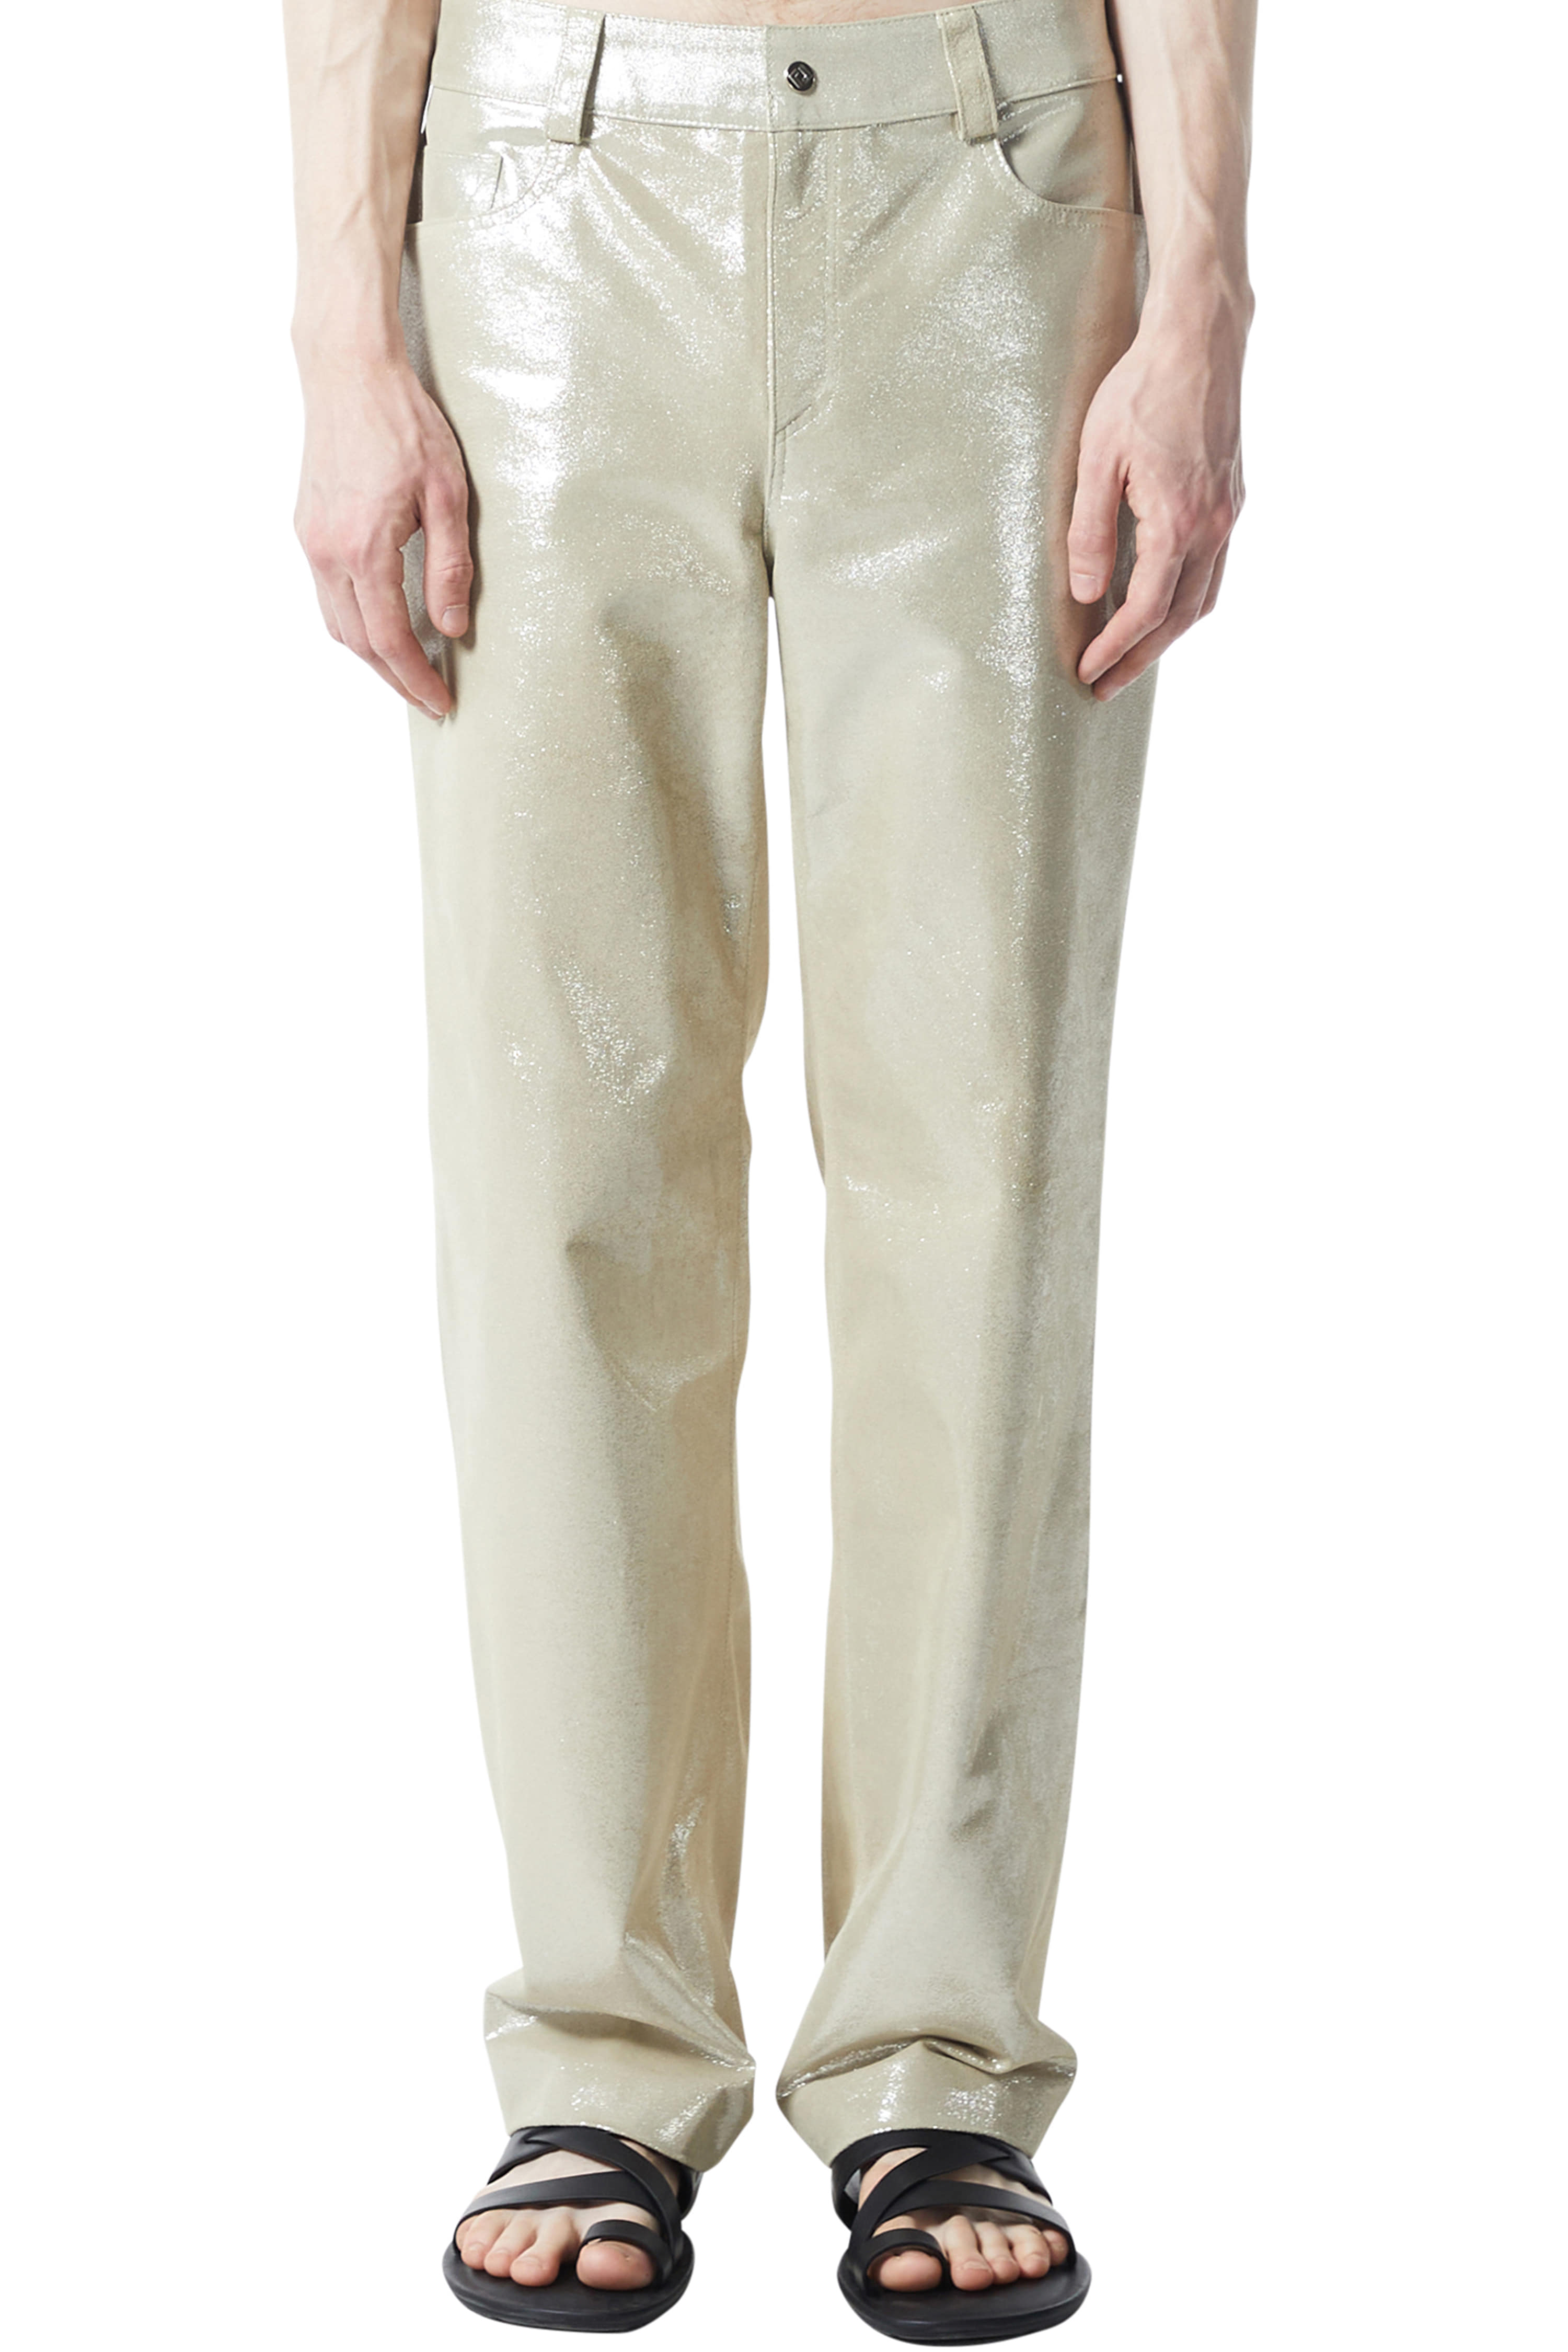 BEIGE GLOSSY LEATHER PANTS